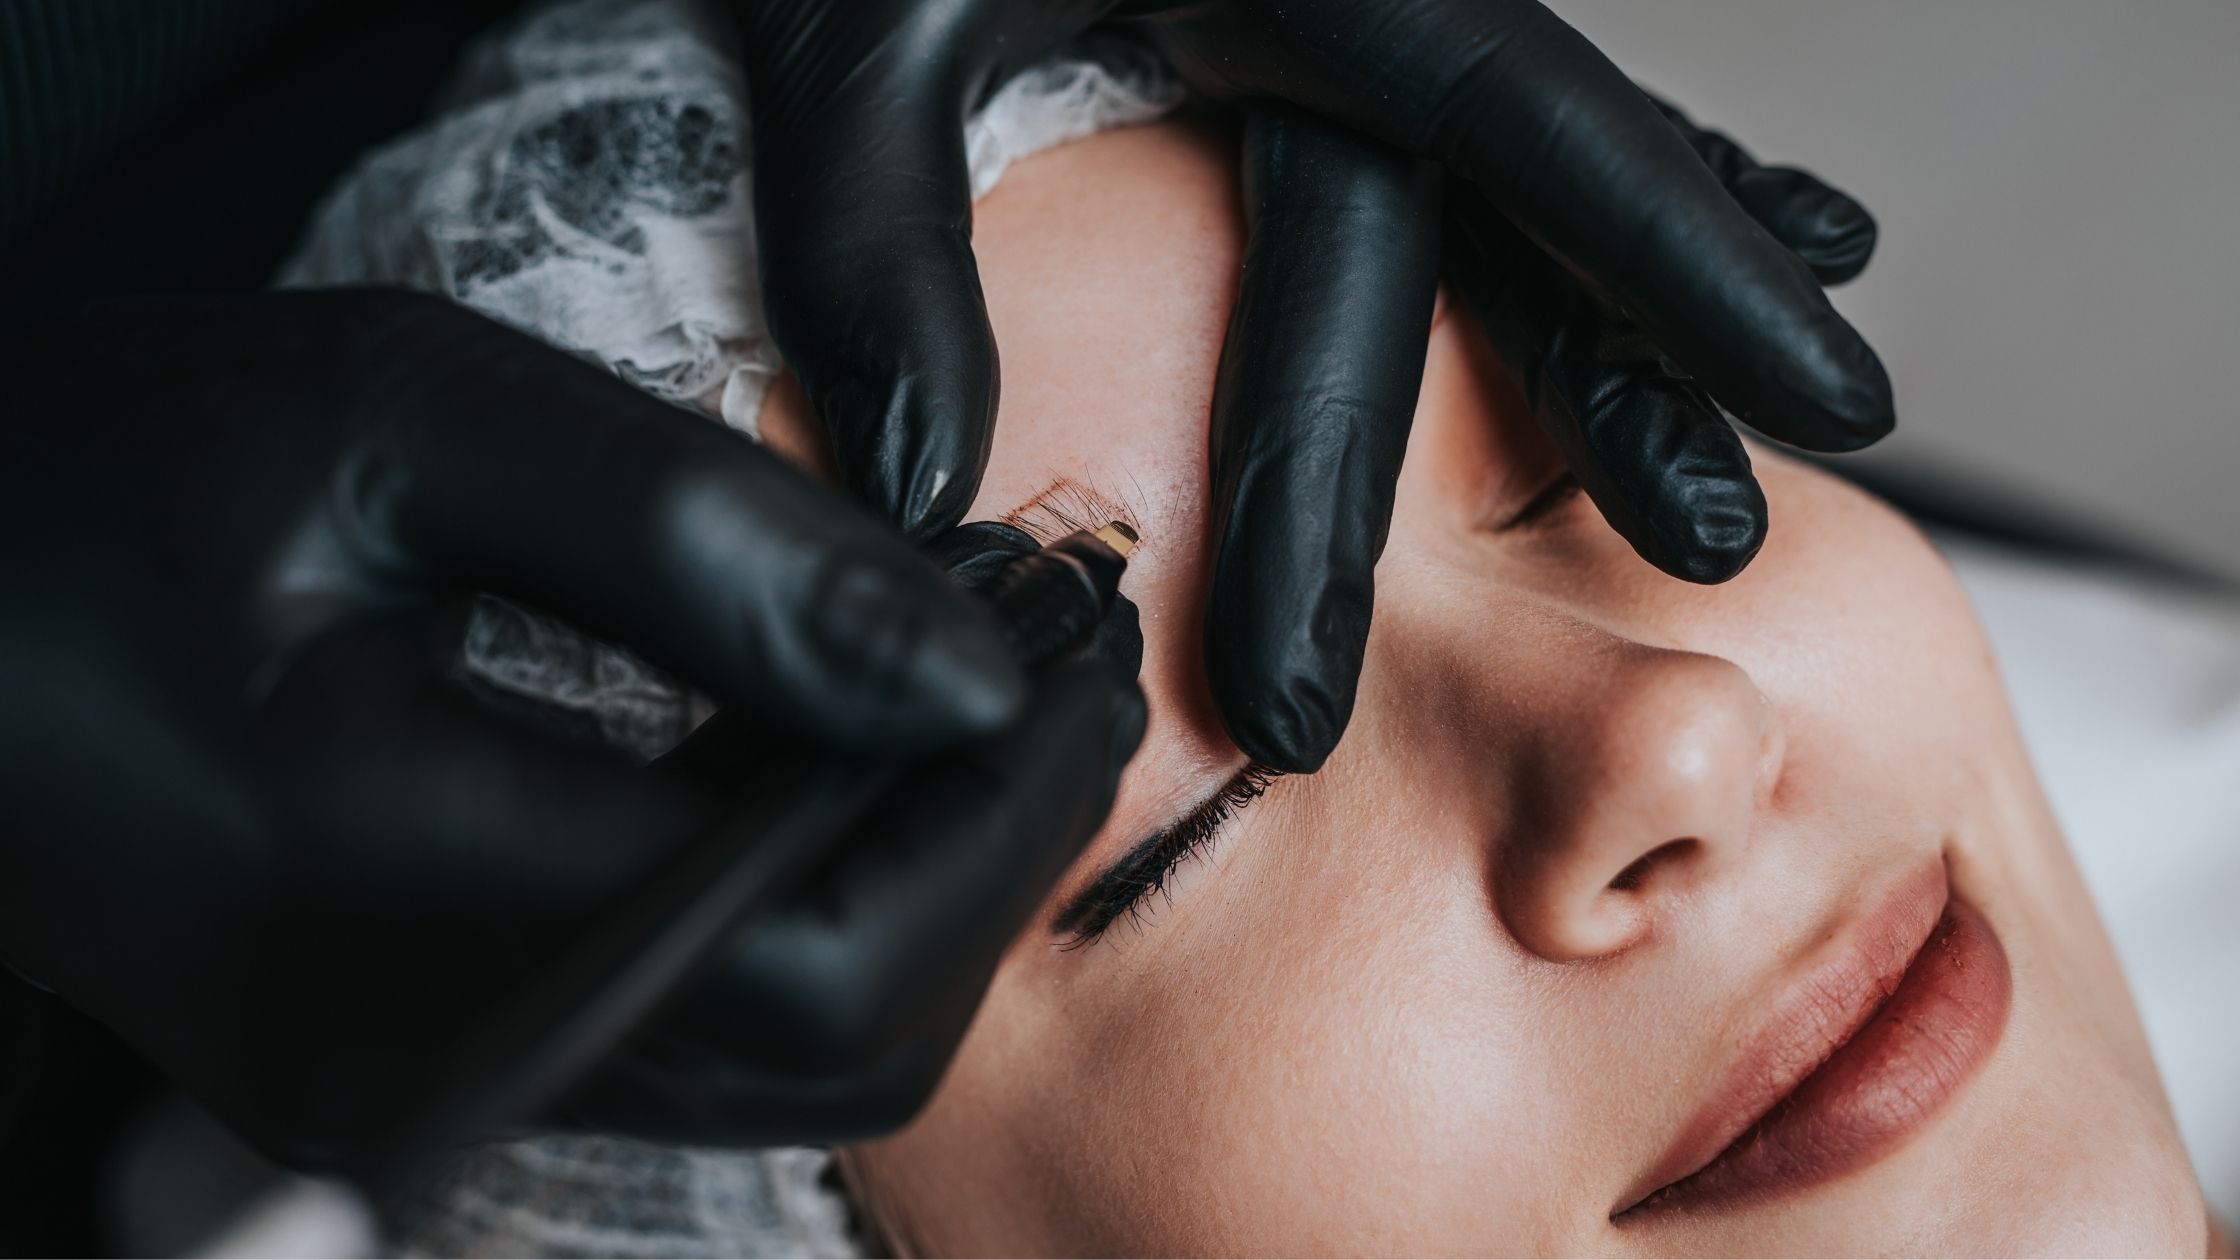 Microblading Eyebrows: The Difference Between Microblading, Microshading, and Microfeathering